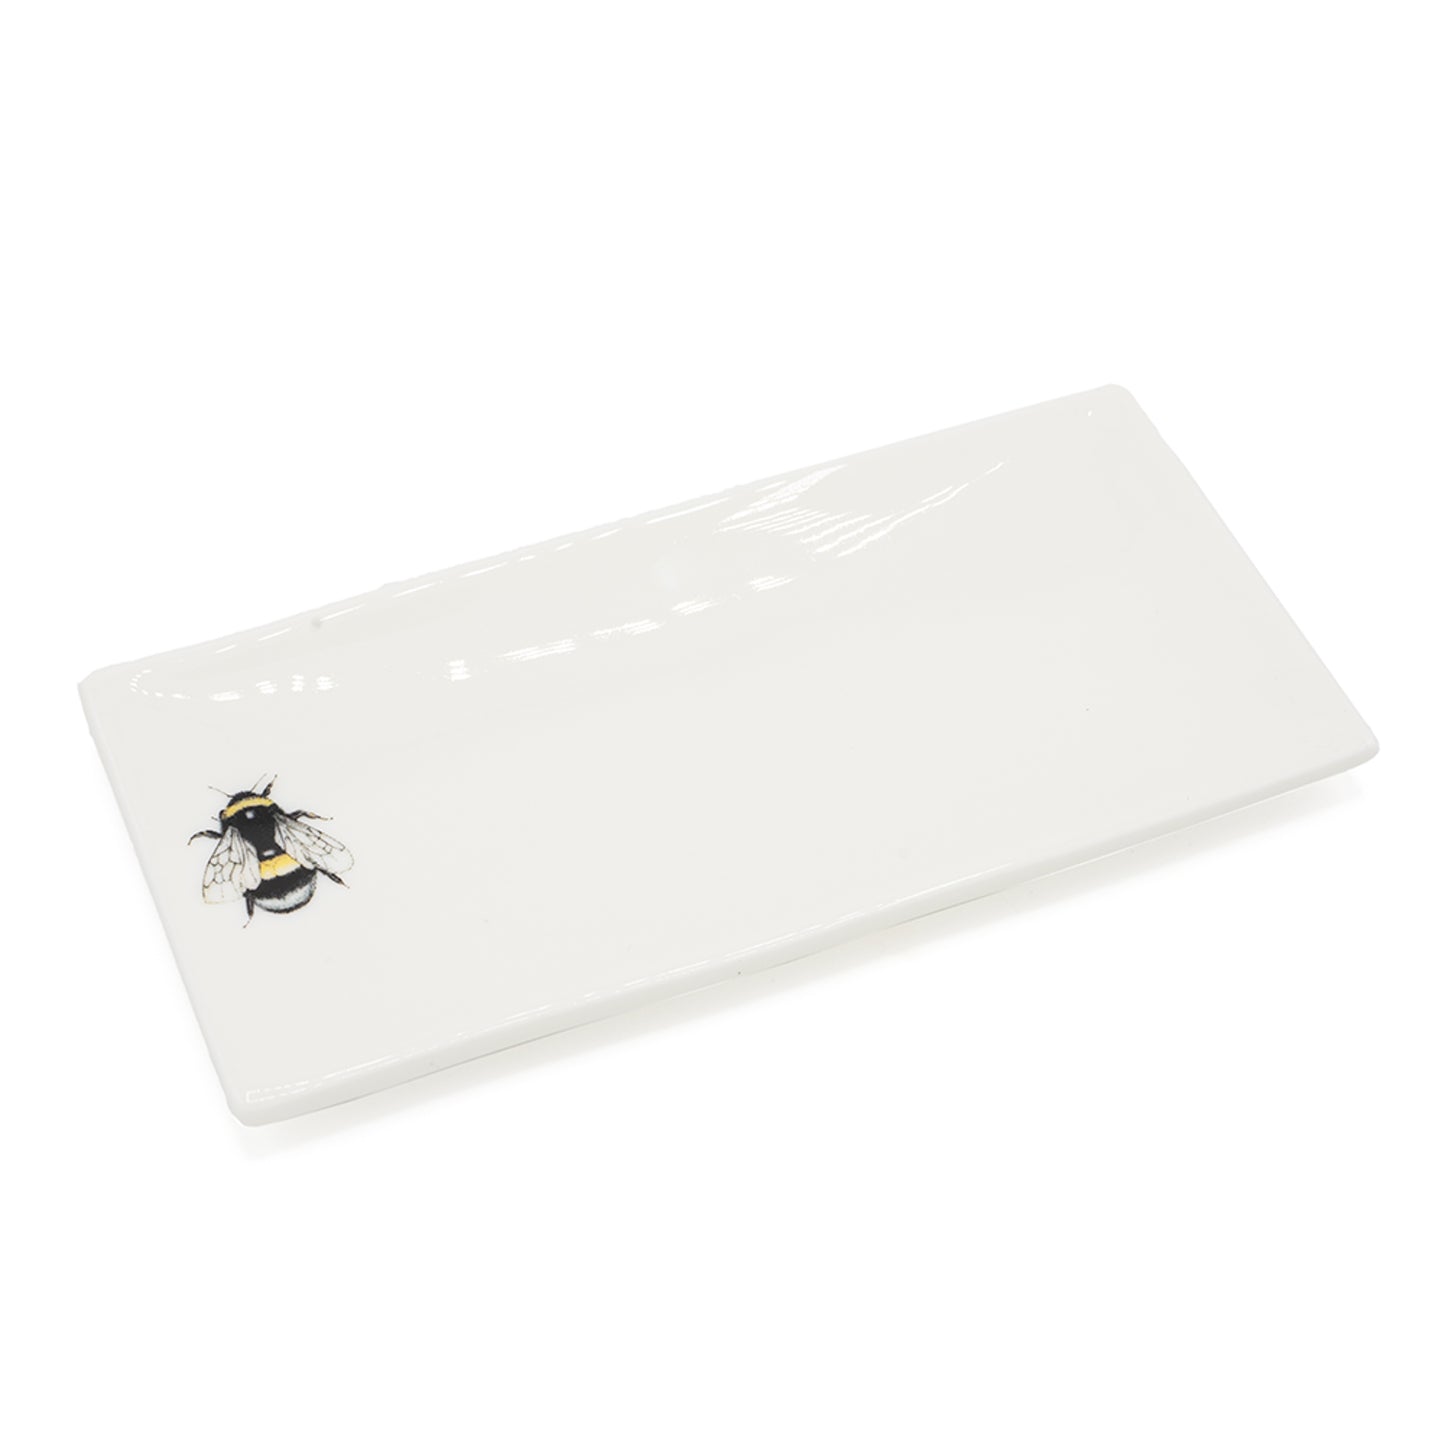 Rectangular soap dish with a picture of a bee on it. Photographed against white background.